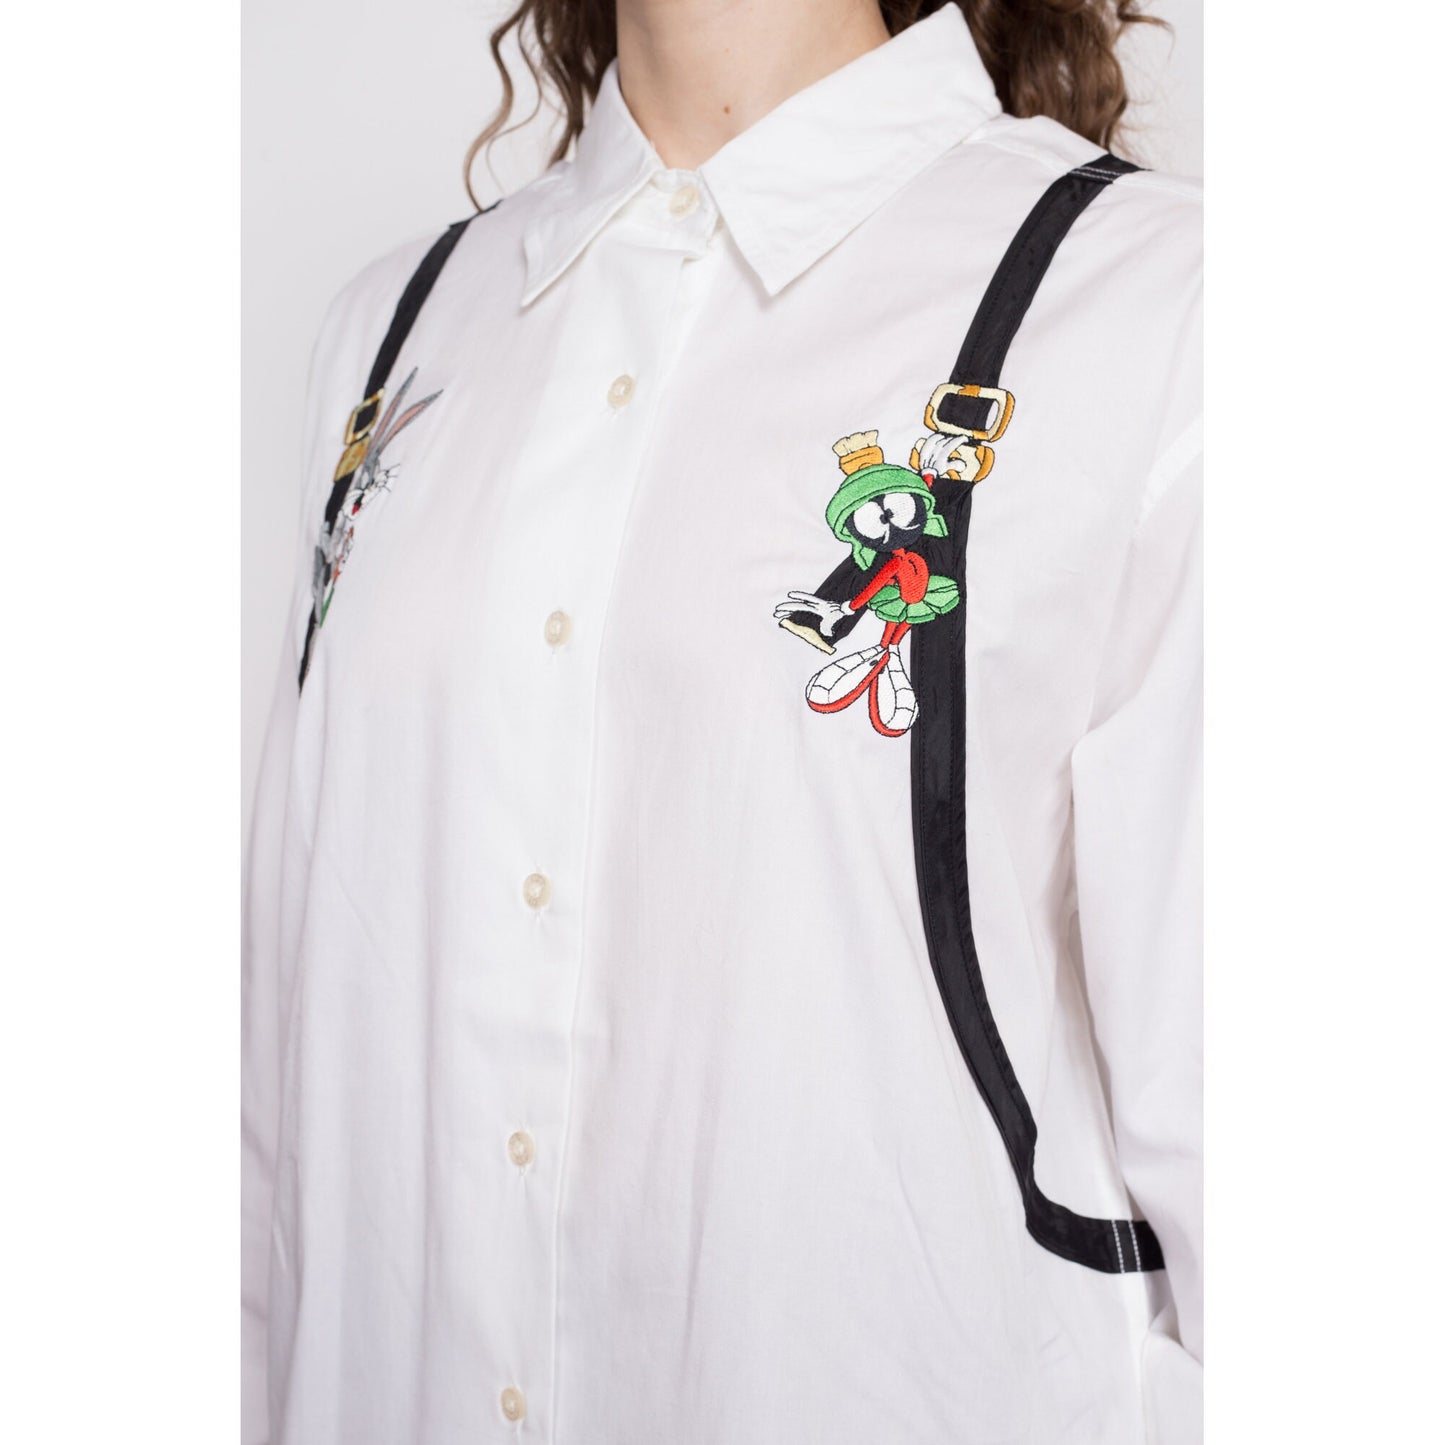 90s Looney Tunes Backpack Shirt - Large | Vintage White Button Up Collared Long Sleeve Novelty Top